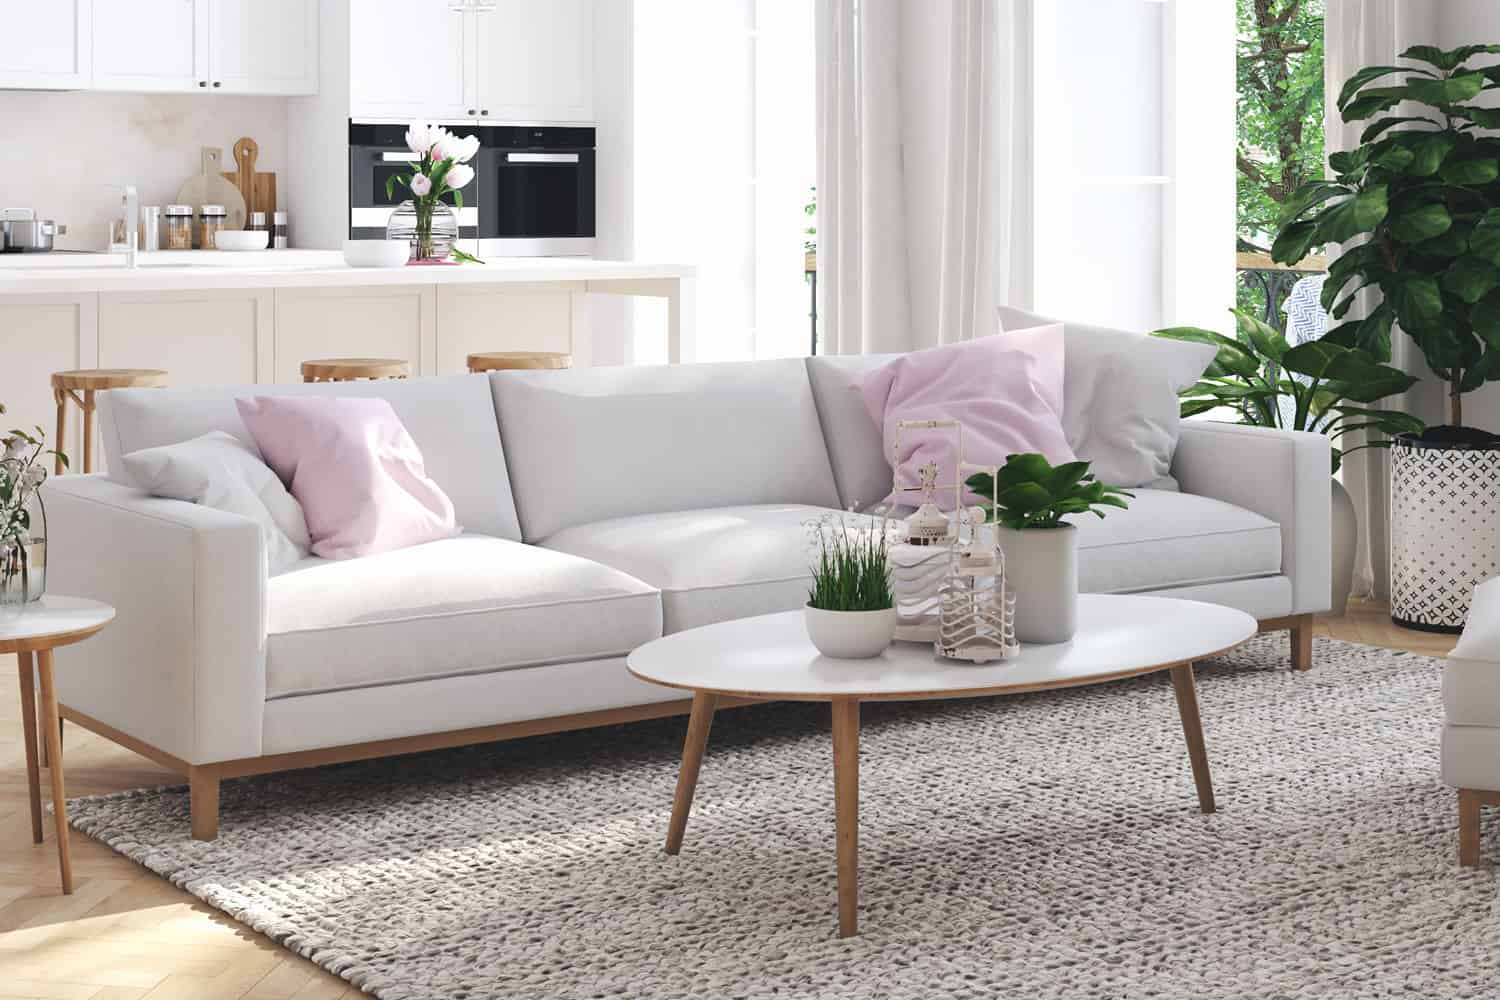 How To Replace Sofa Cushions With Foam